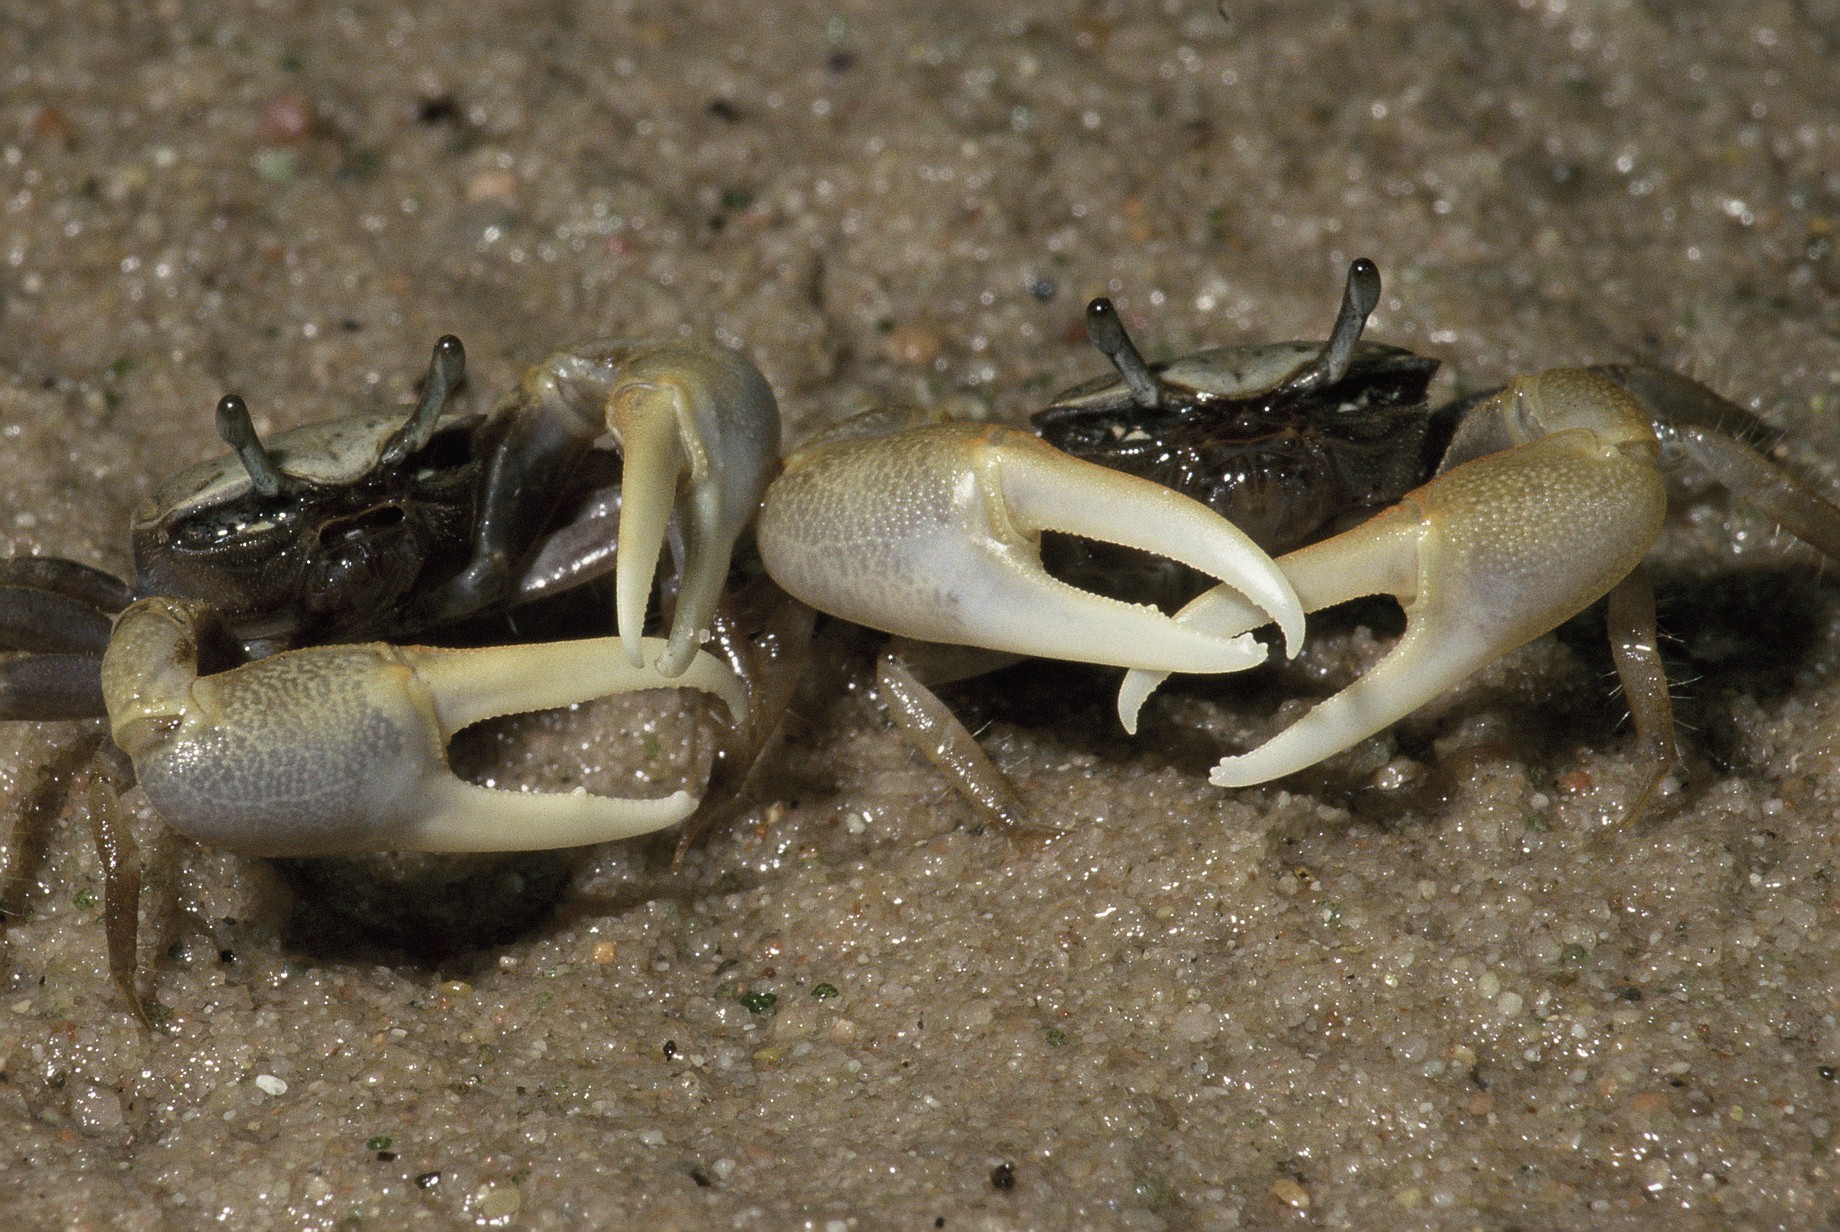 Double-clawed males